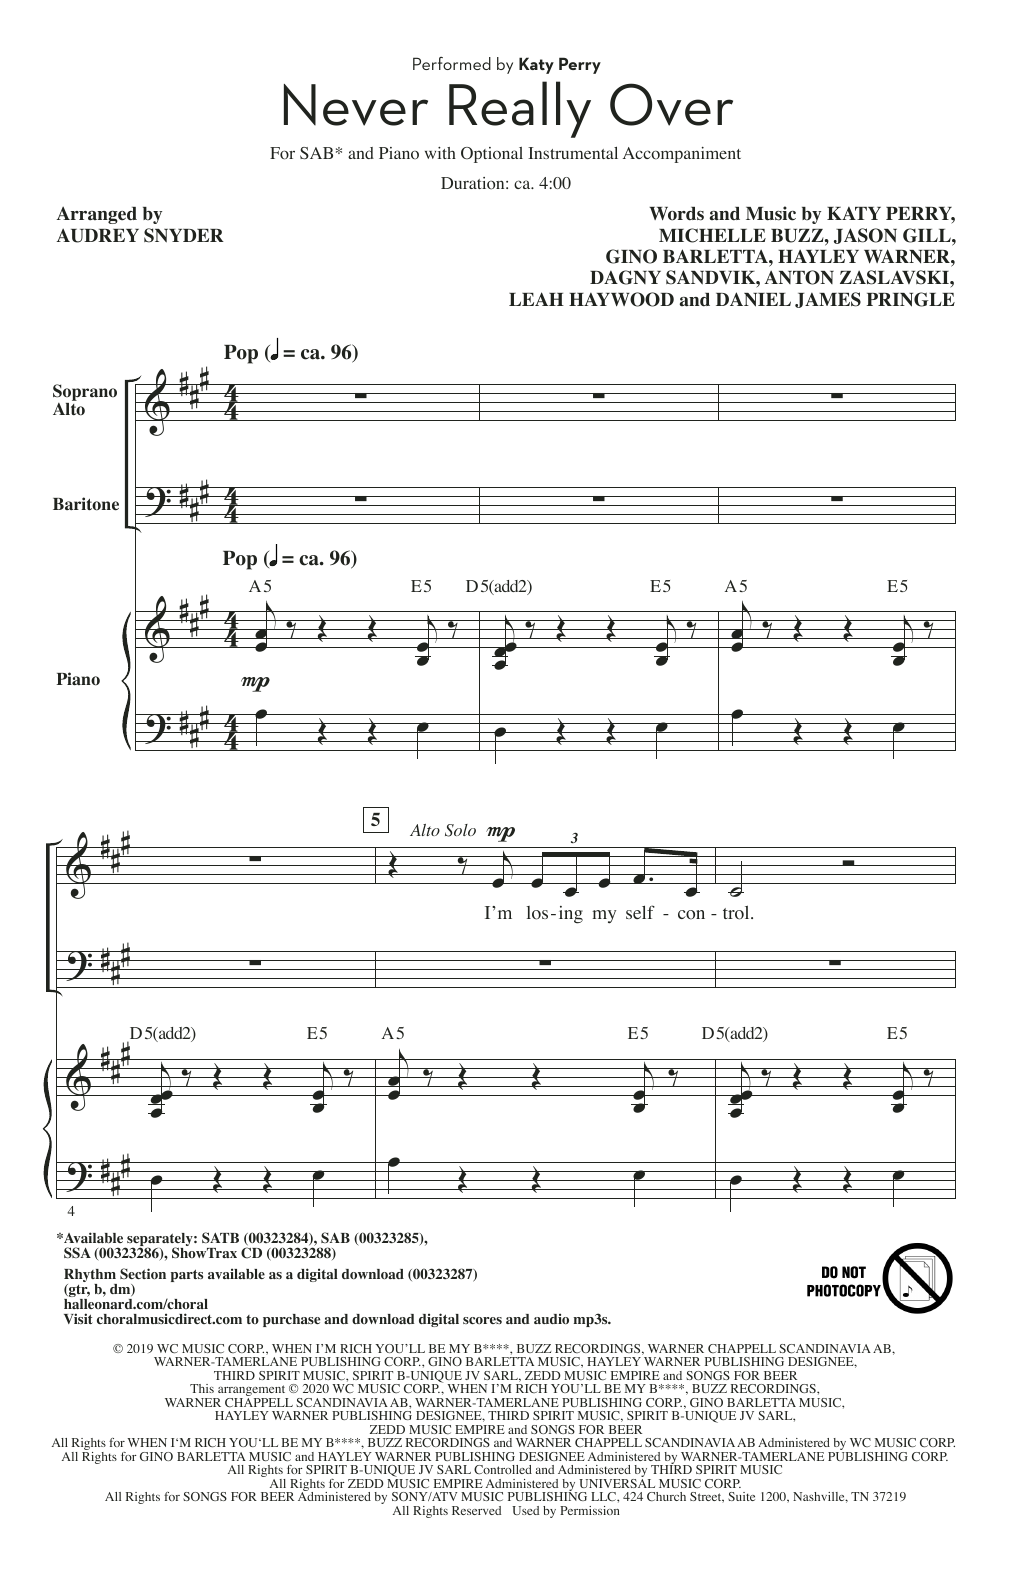 Download Katy Perry Never Really Over (arr. Audrey Snyder) Sheet Music